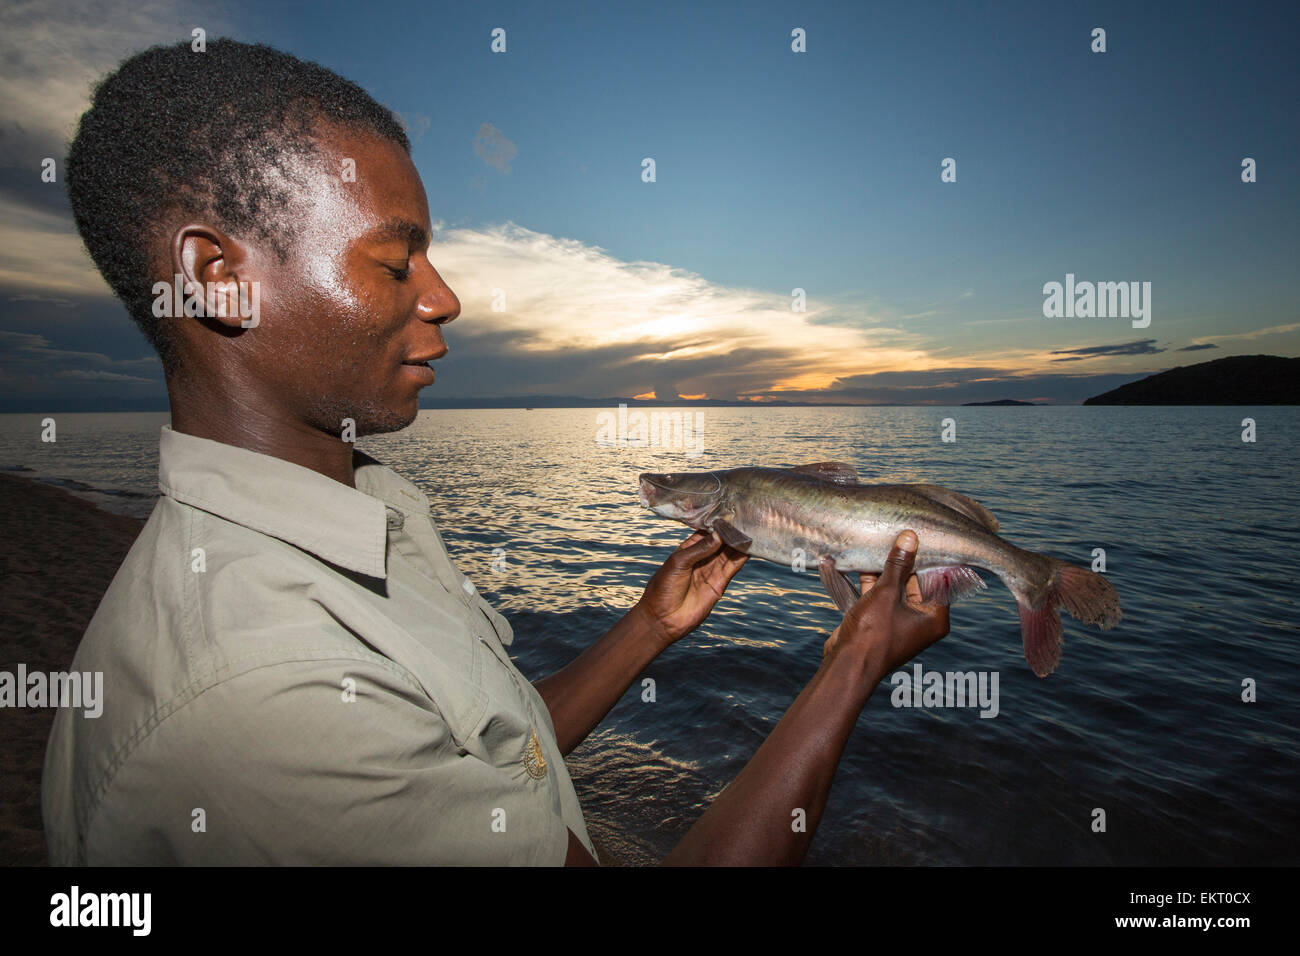 A fisherman at Cape Maclear on the shores of Lake Malawi, Malawi, Africa, with his catch of fish. Stock Photo